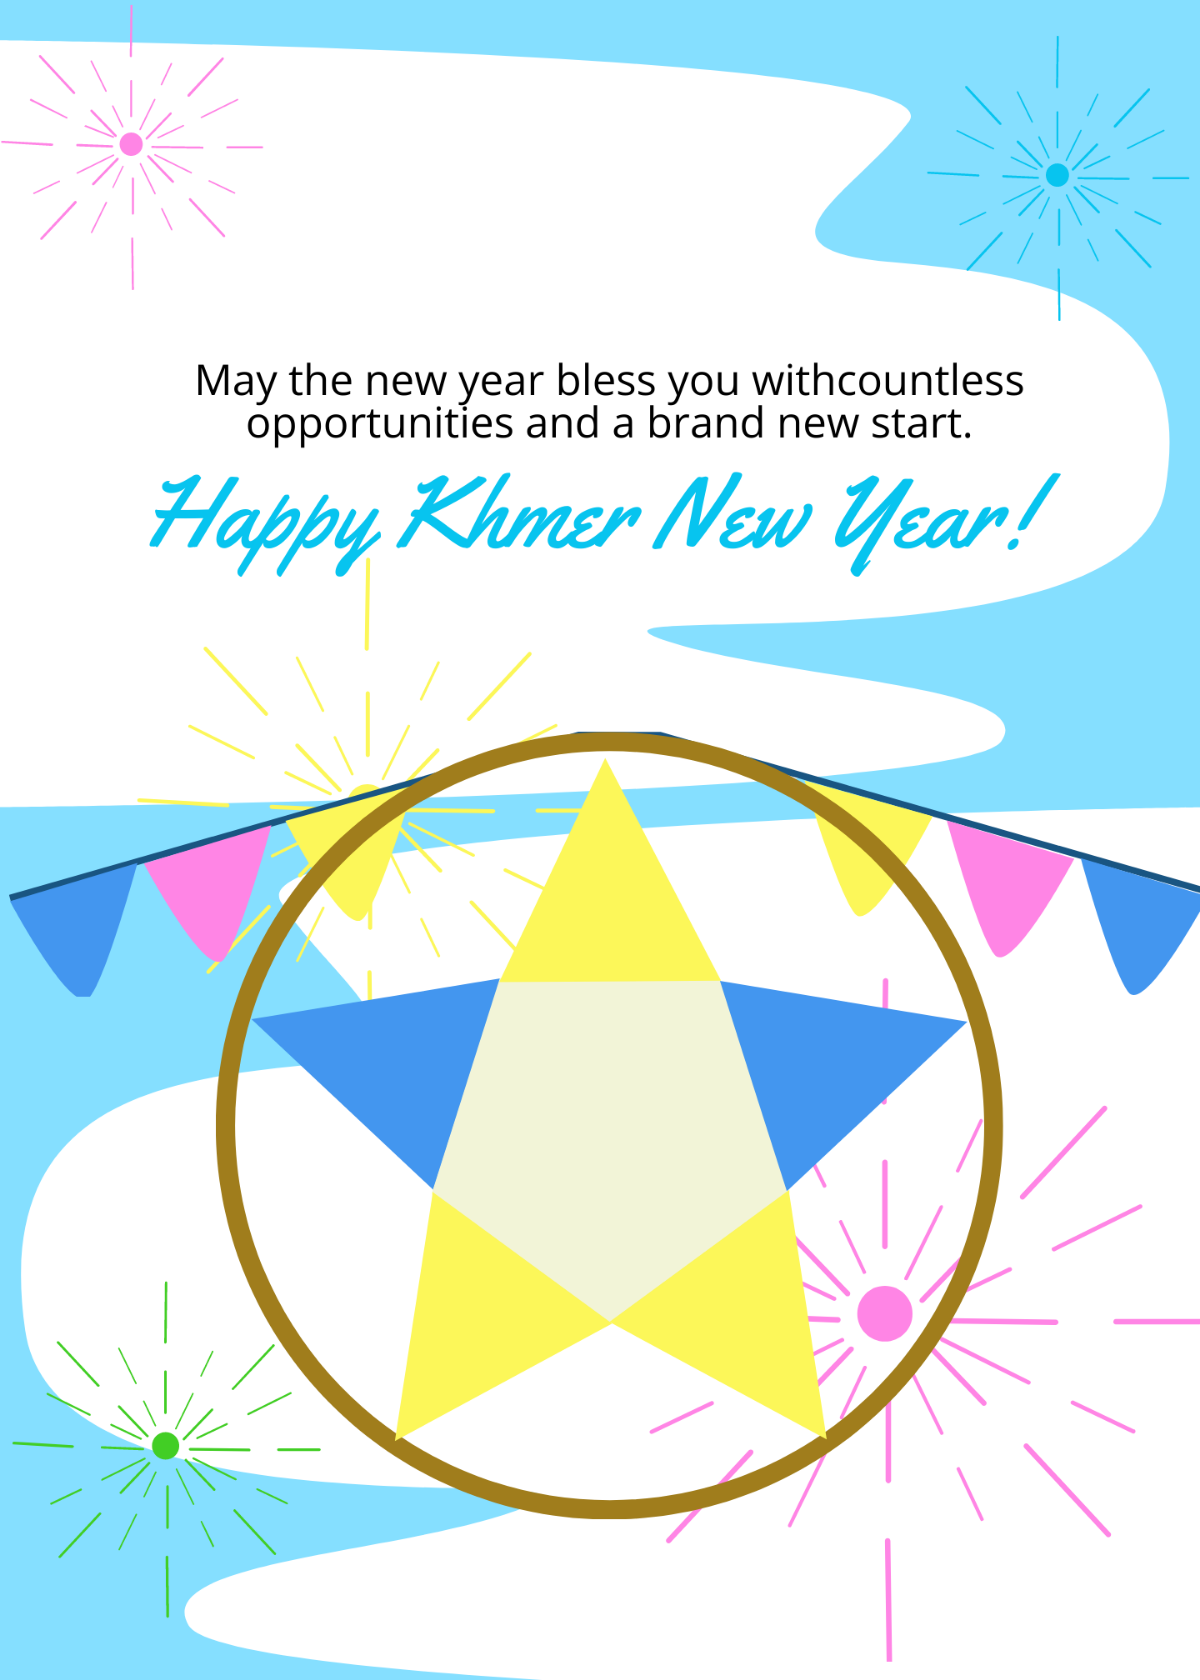 Khmer New Year Greeting Card Template